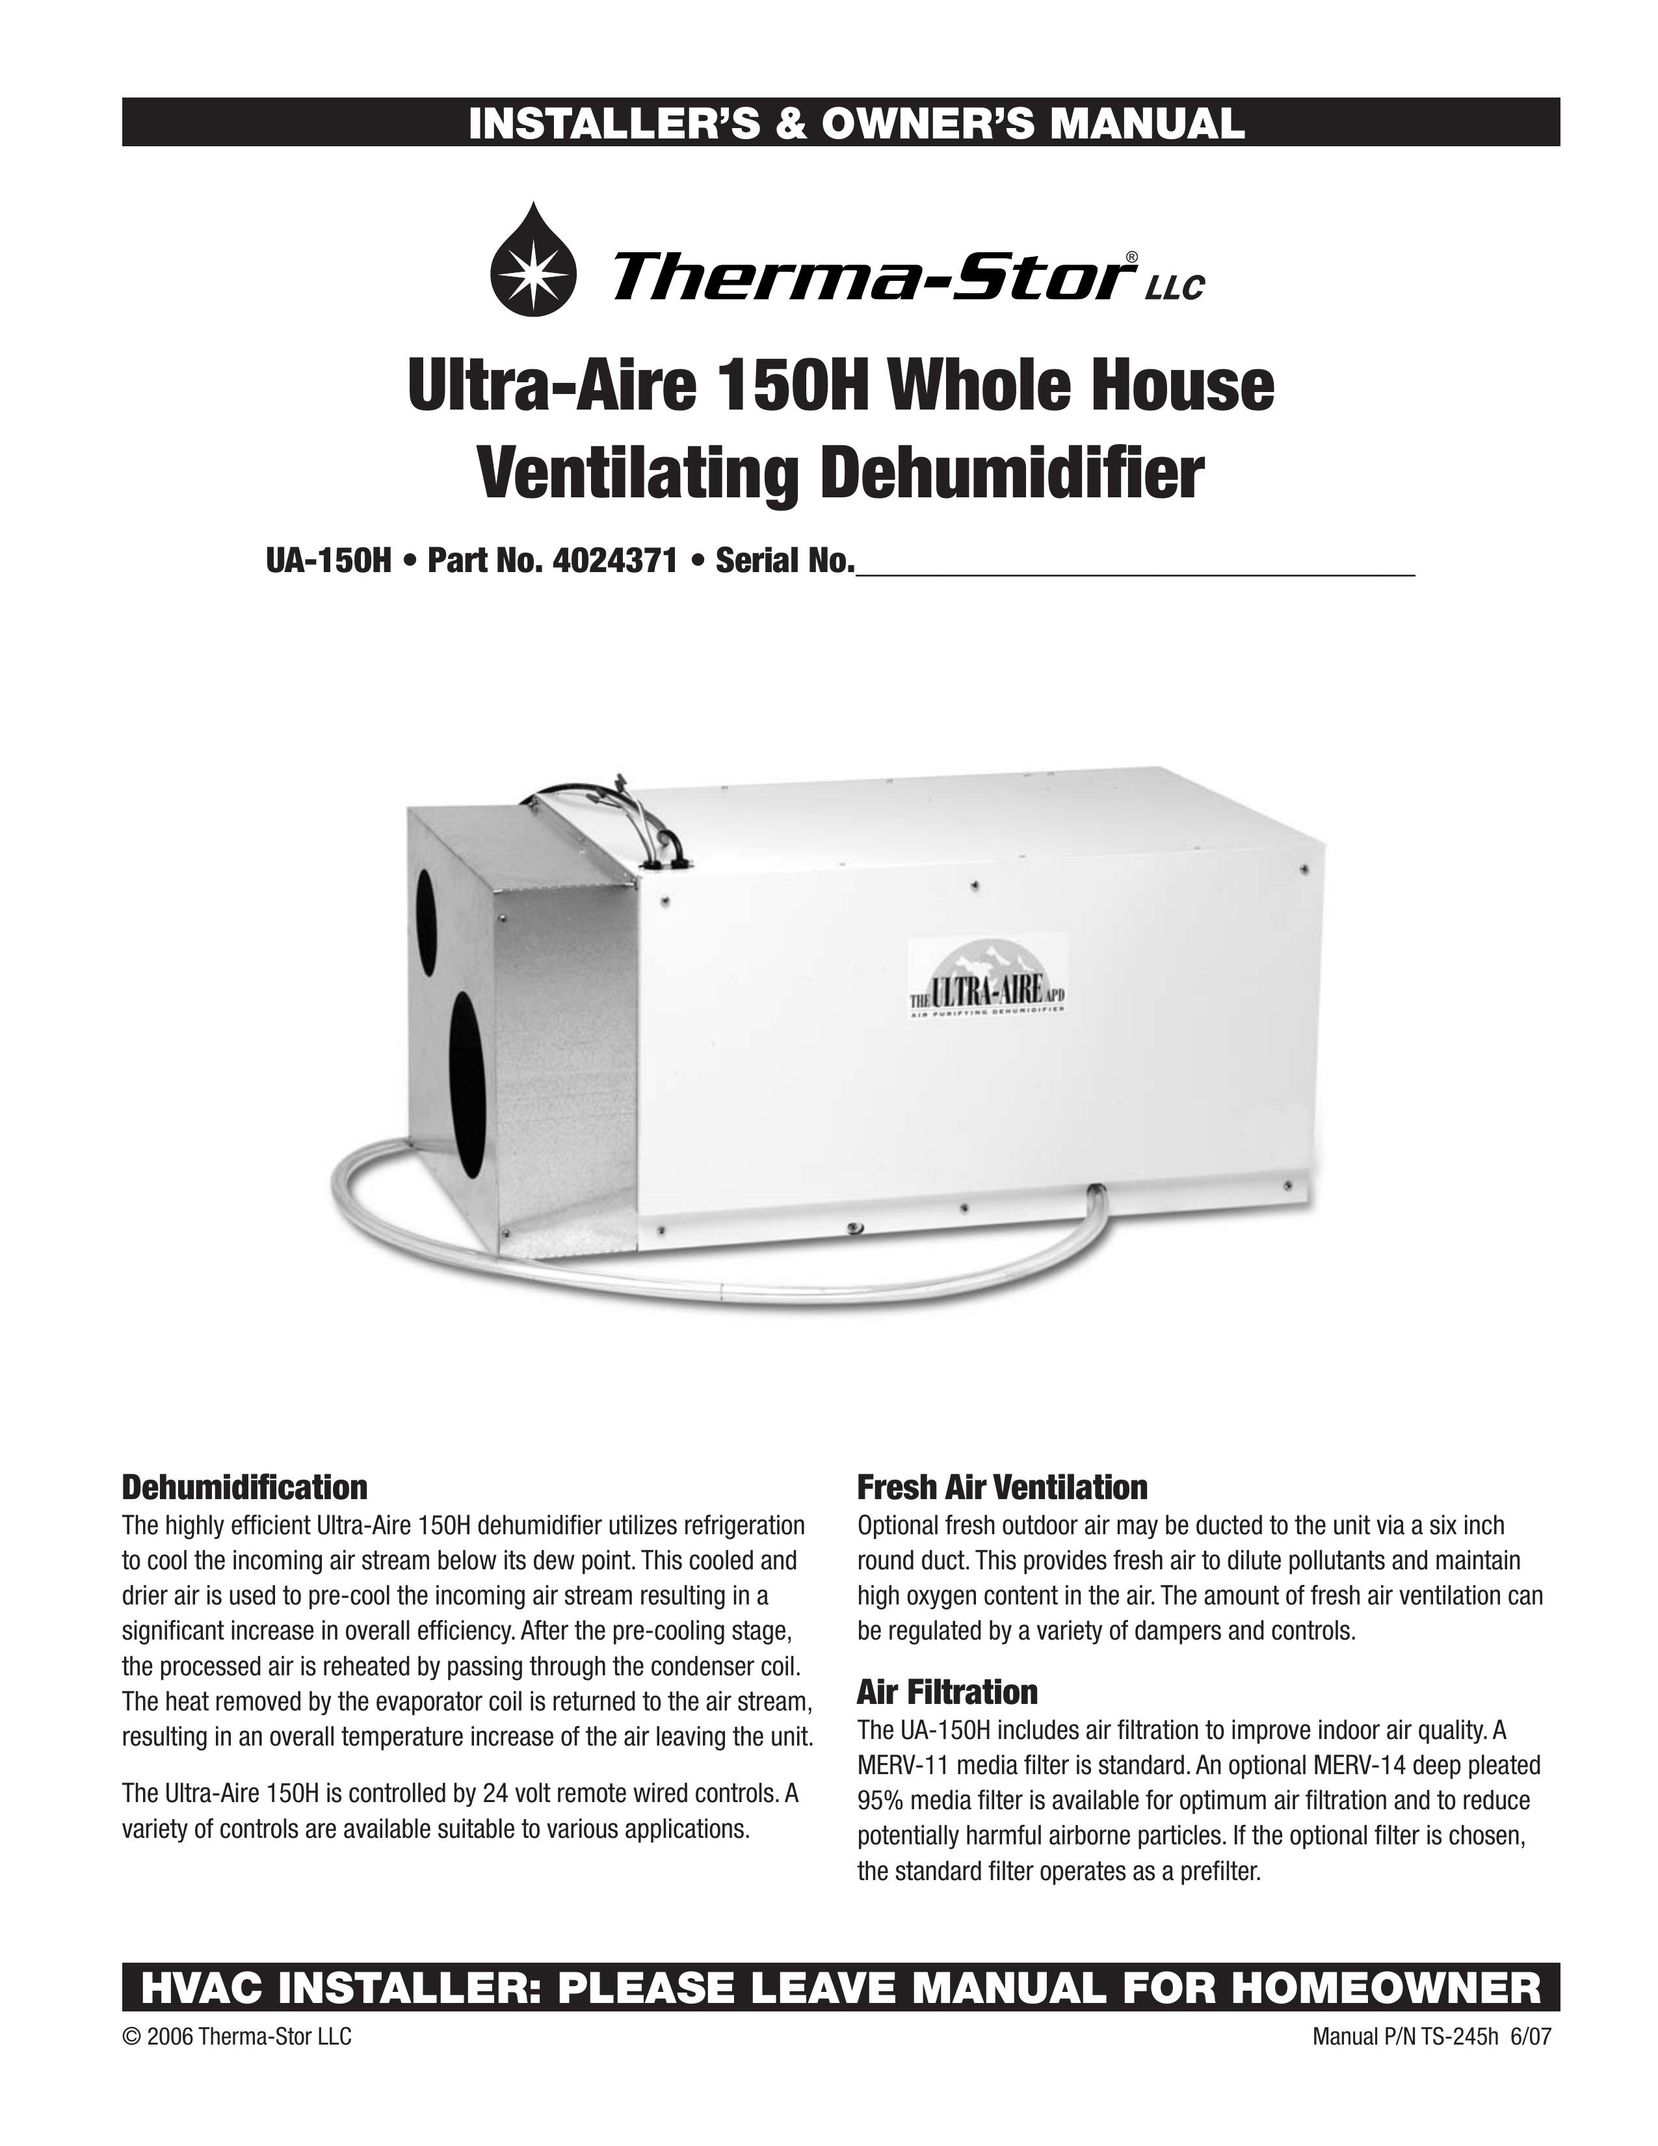 Therma-Stor Products Group UA-150H Dehumidifier User Manual